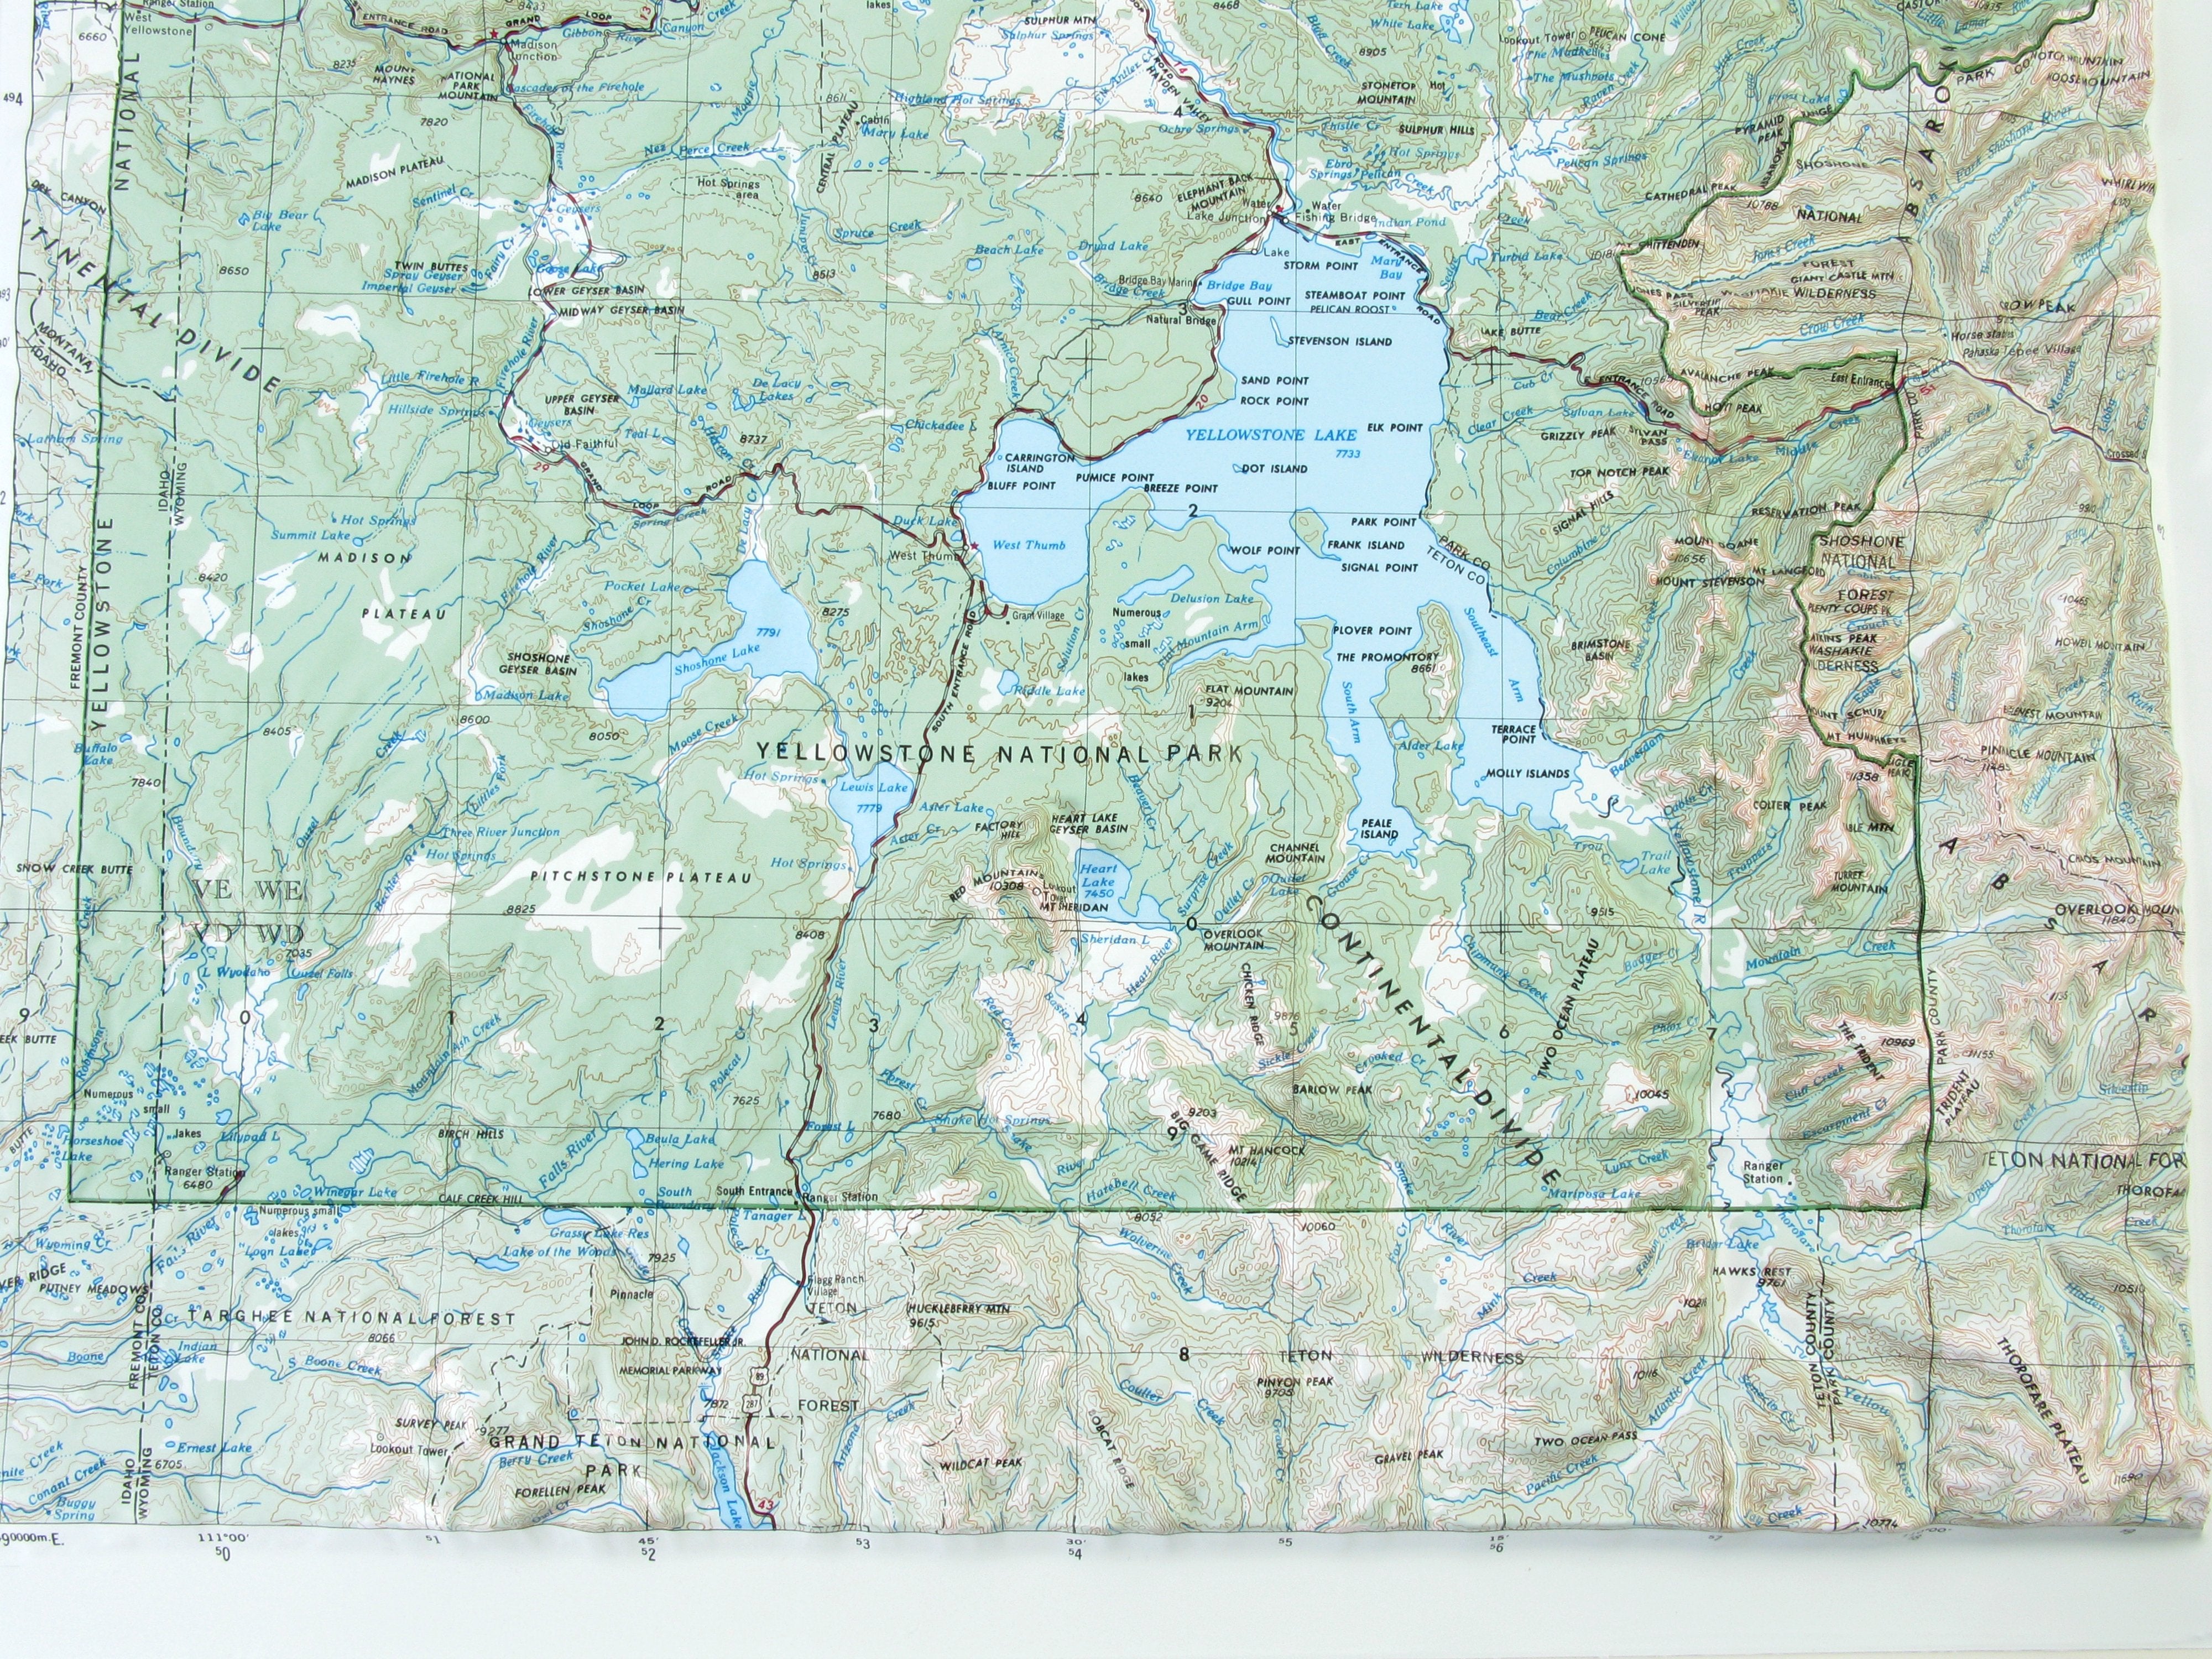 Yellowstone National Park USGS Regional Three Dimensional 3D Raised Relief Map